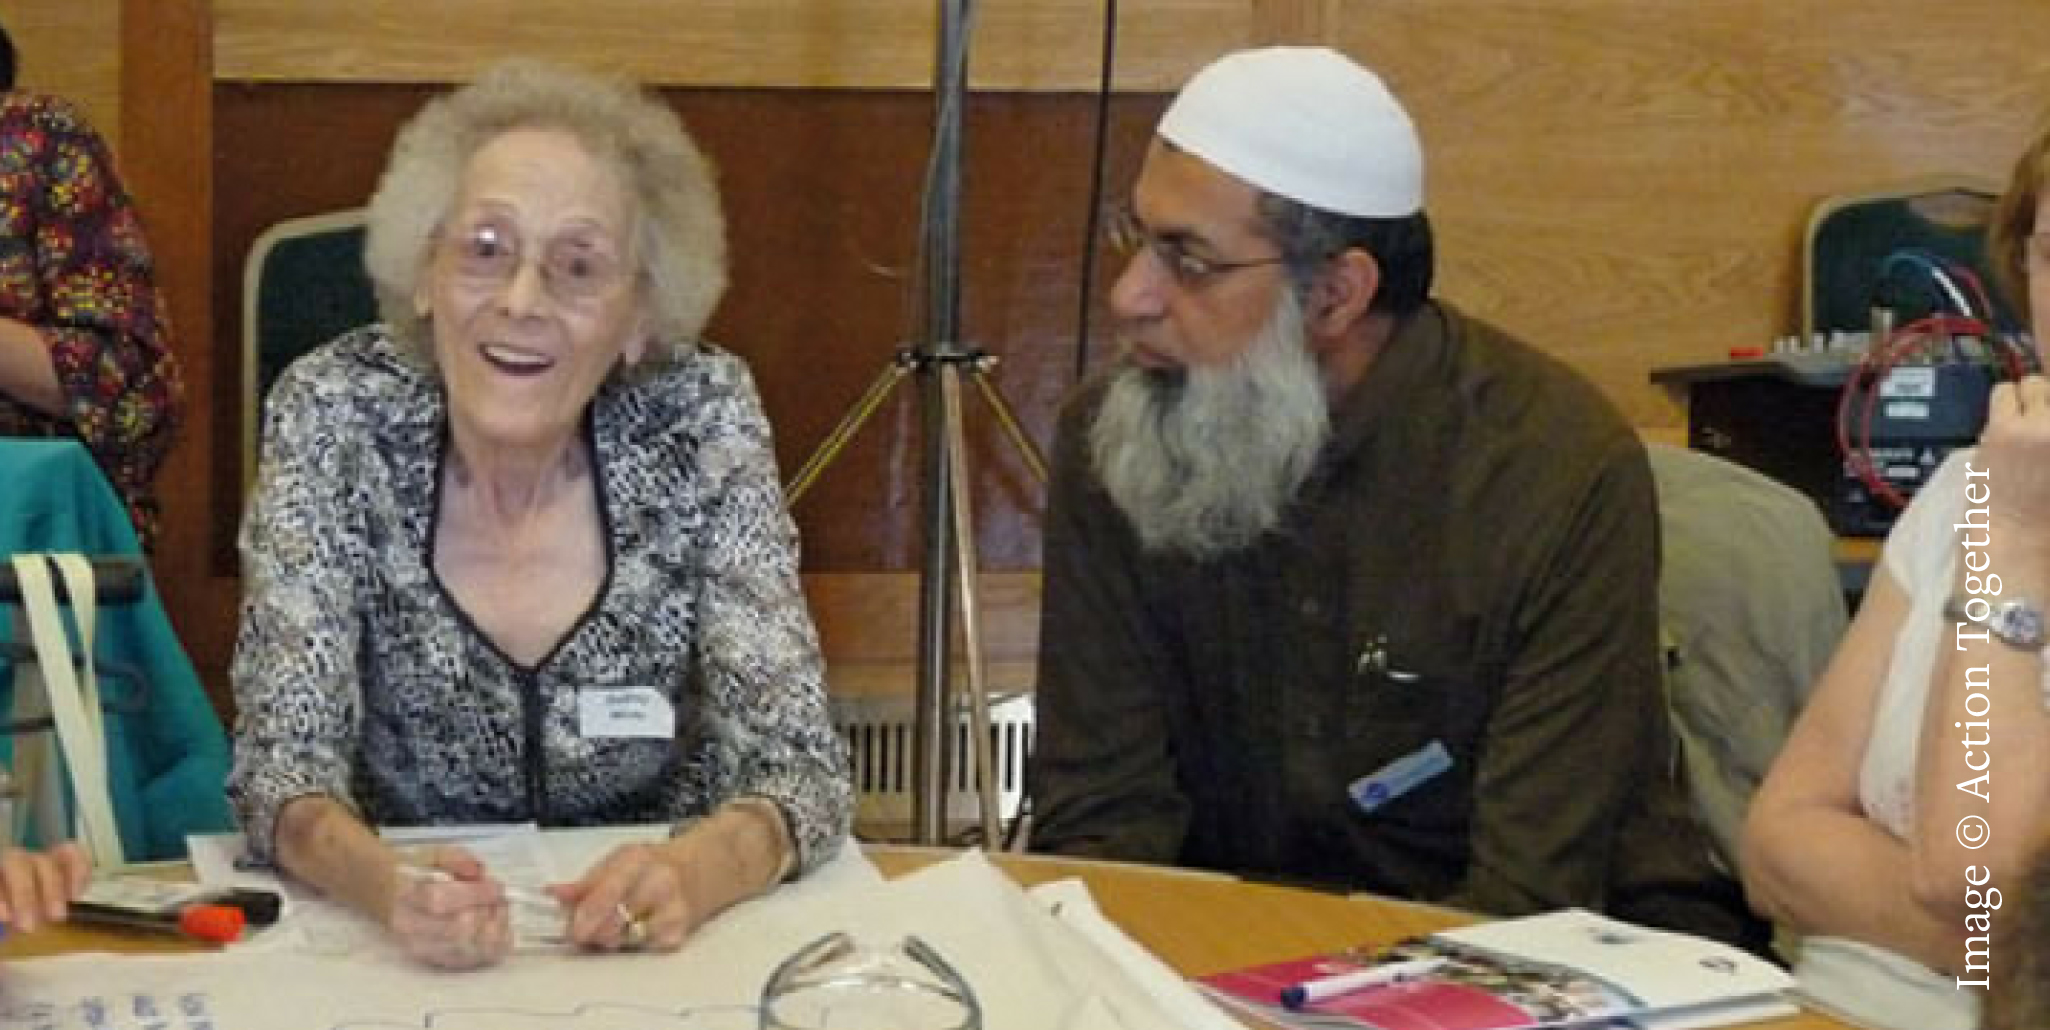 A white older woman and a brown muslim man sat around a table.